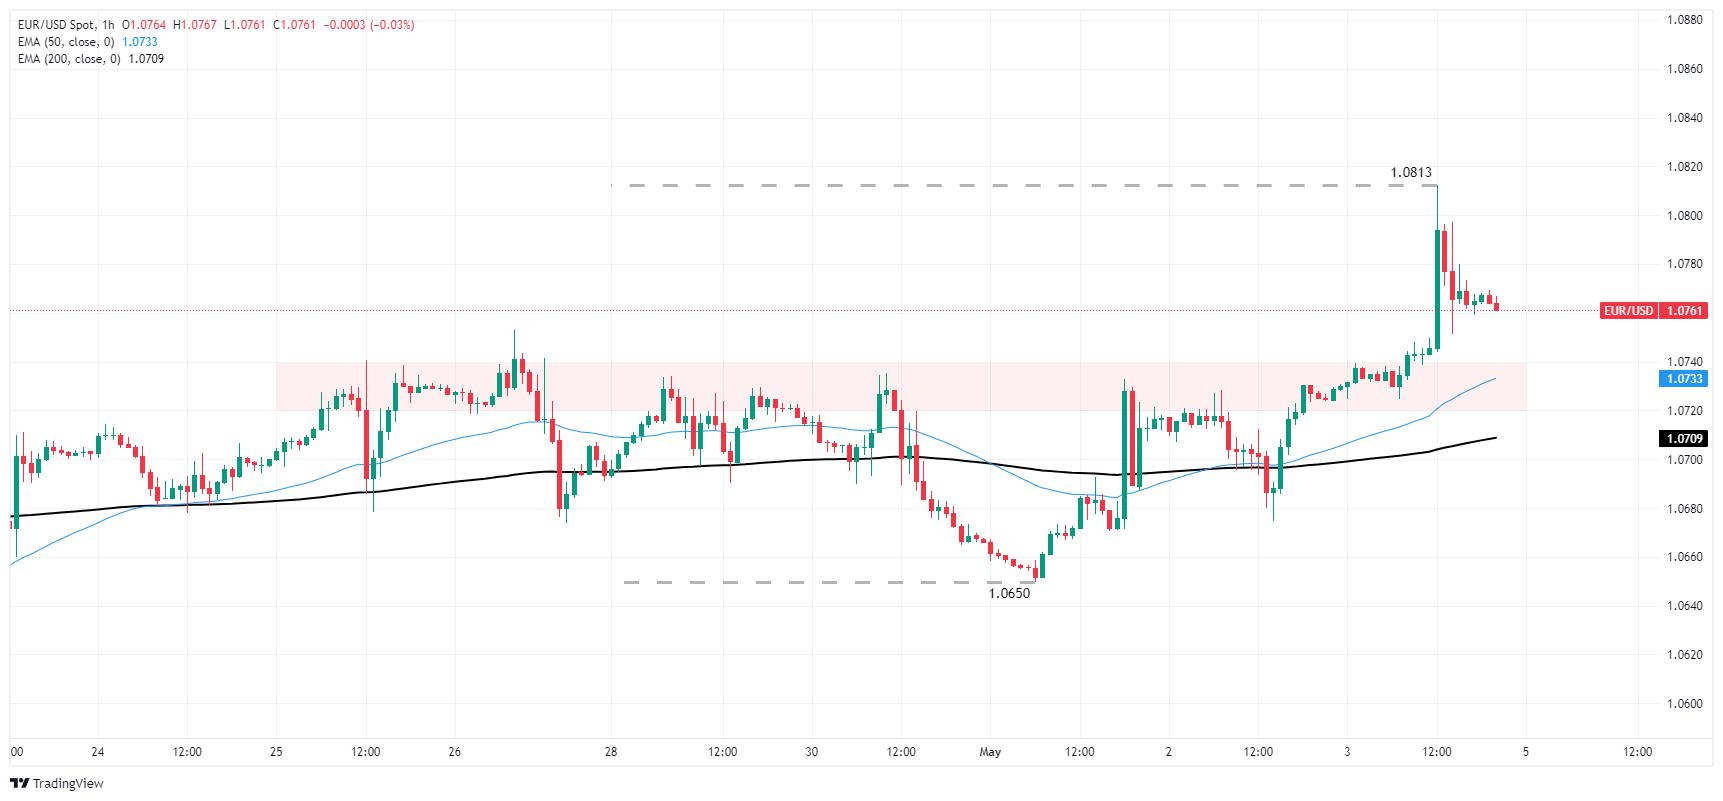 EUR/USD breaks above recent congestion as US NFP miss drives down Greenback